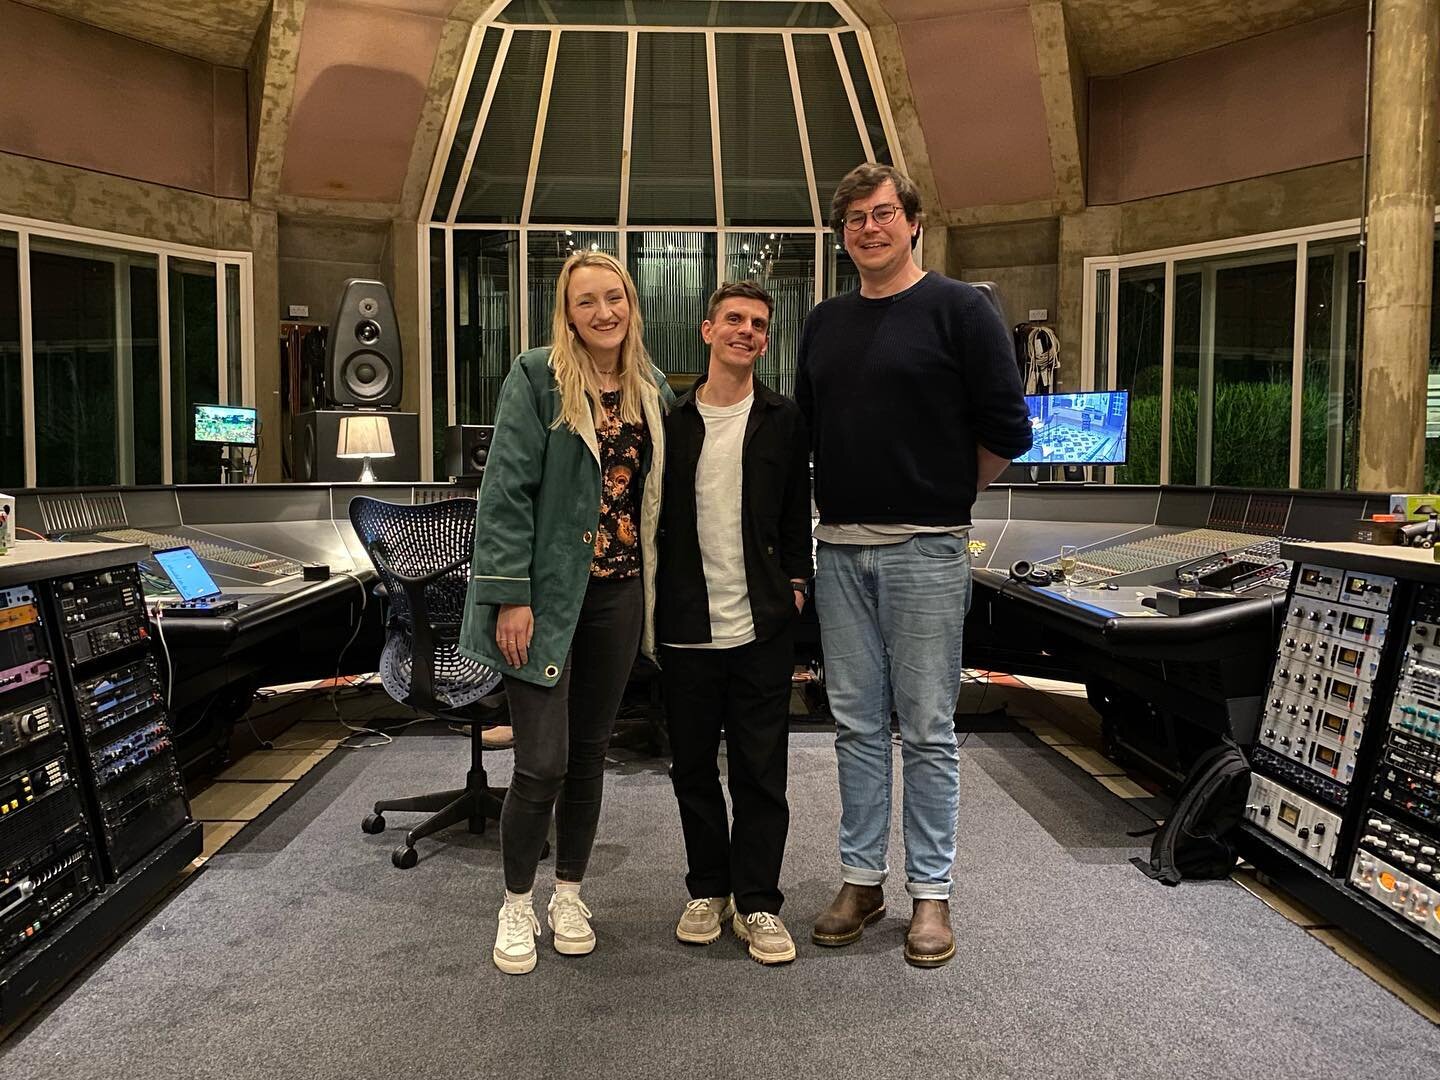 This time last week with @alexparsonscomposer @realworldstudios 🙌🙌 

Such a brilliant session with a wonderful team in an incredible place. Can&rsquo;t wait for this project to be released and Alex&rsquo;s remarkable score to be heard 🌟 in awe!!

